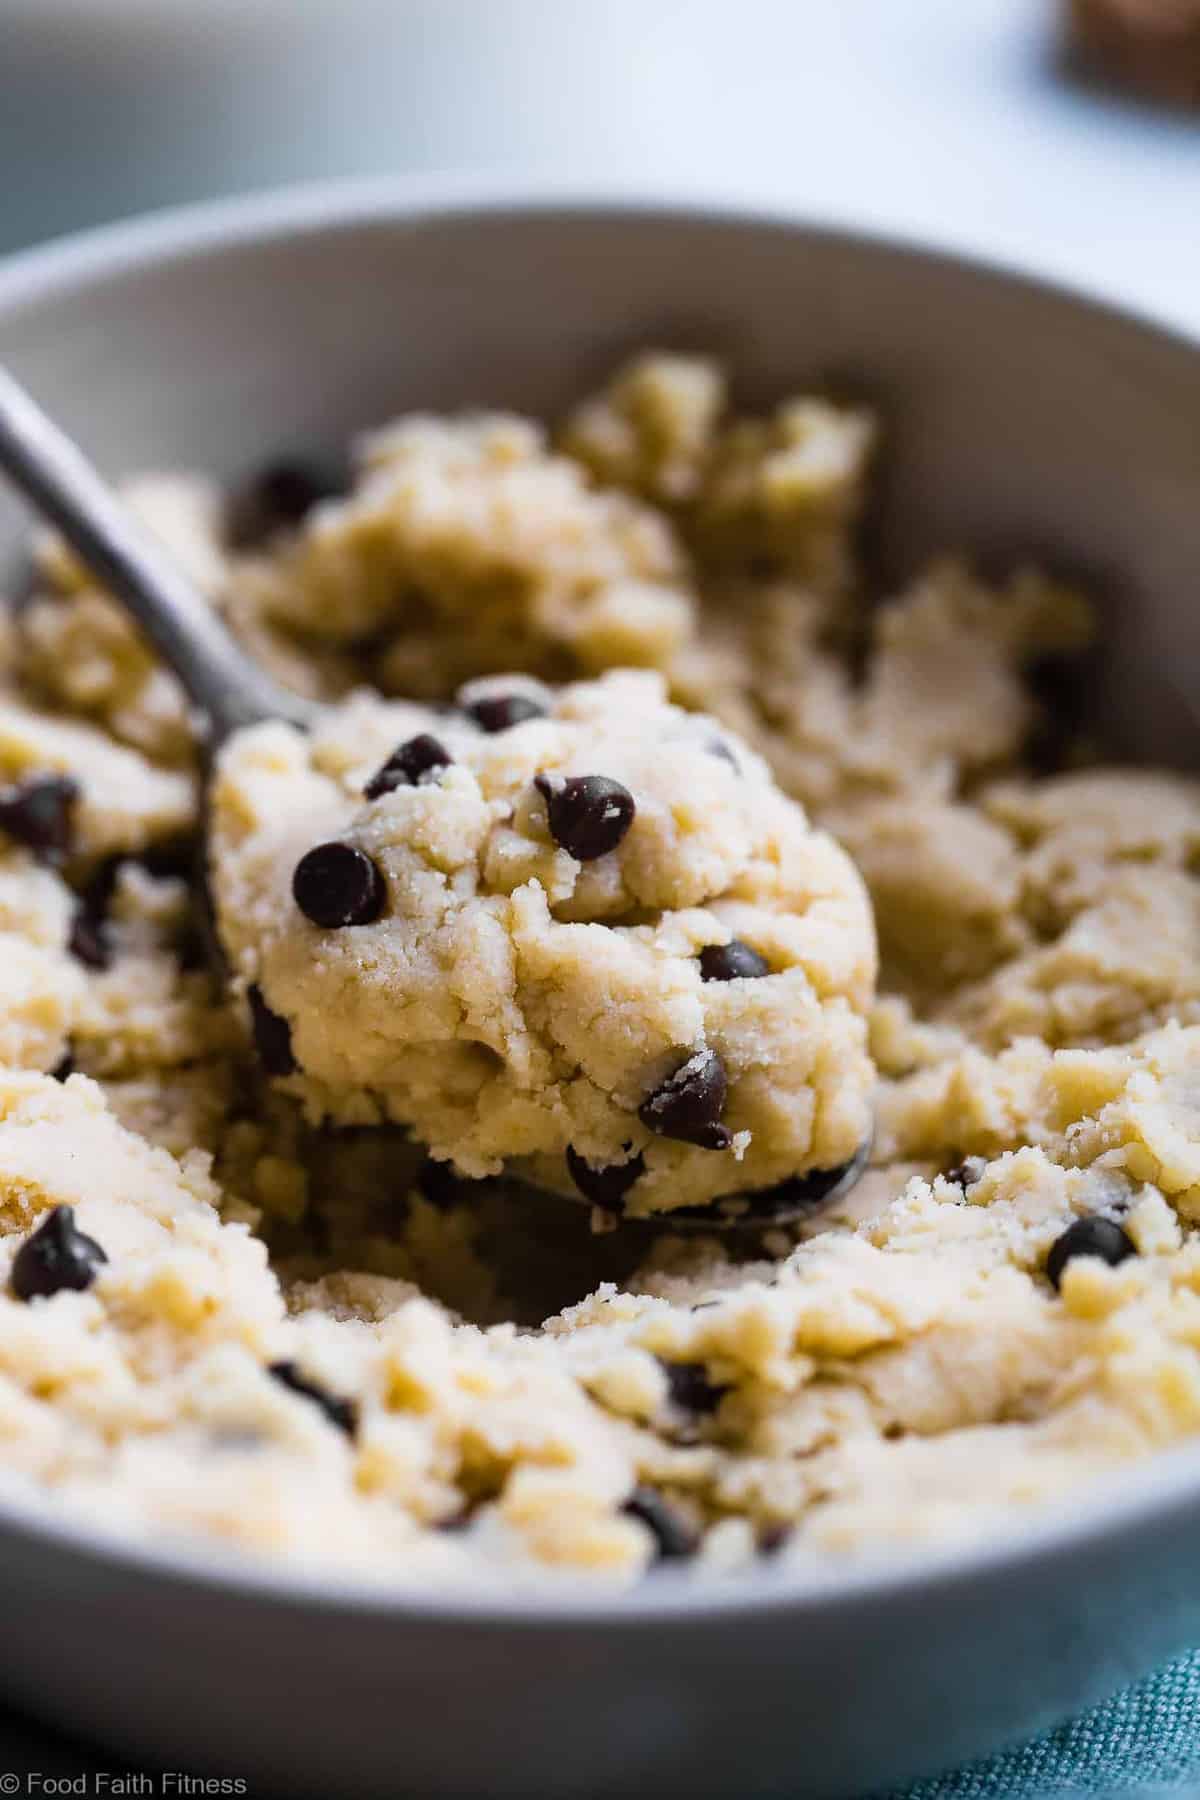 Healthy Protein Powder Cookie Dough -  This 5 ingredient healthy, edible cookie dough is gluten free, paleo/vegan friendly and ready in 5 minutes! It packs 20g of protein and only 200 calories so you can eat the whole bowl! | #Foodfaithfitness | #Glutenfree #Healthy #Paleo #Vegan #Snack